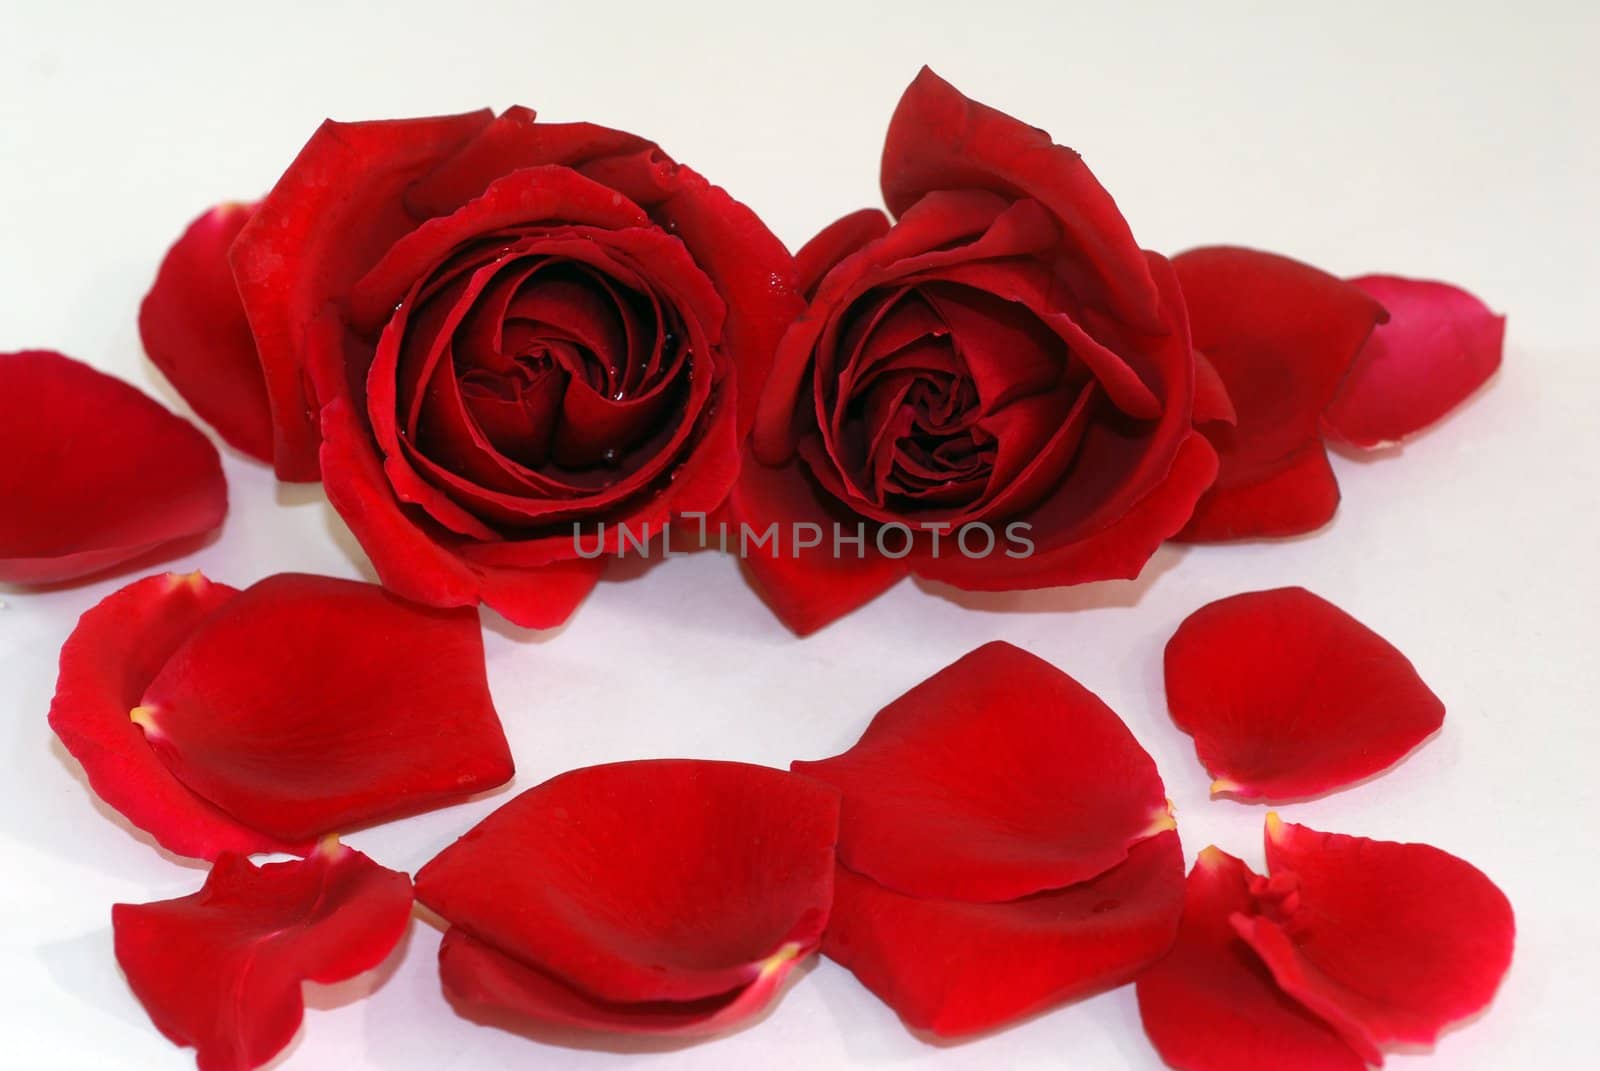 red Rose flower petals spa aromatherapy by nikonite